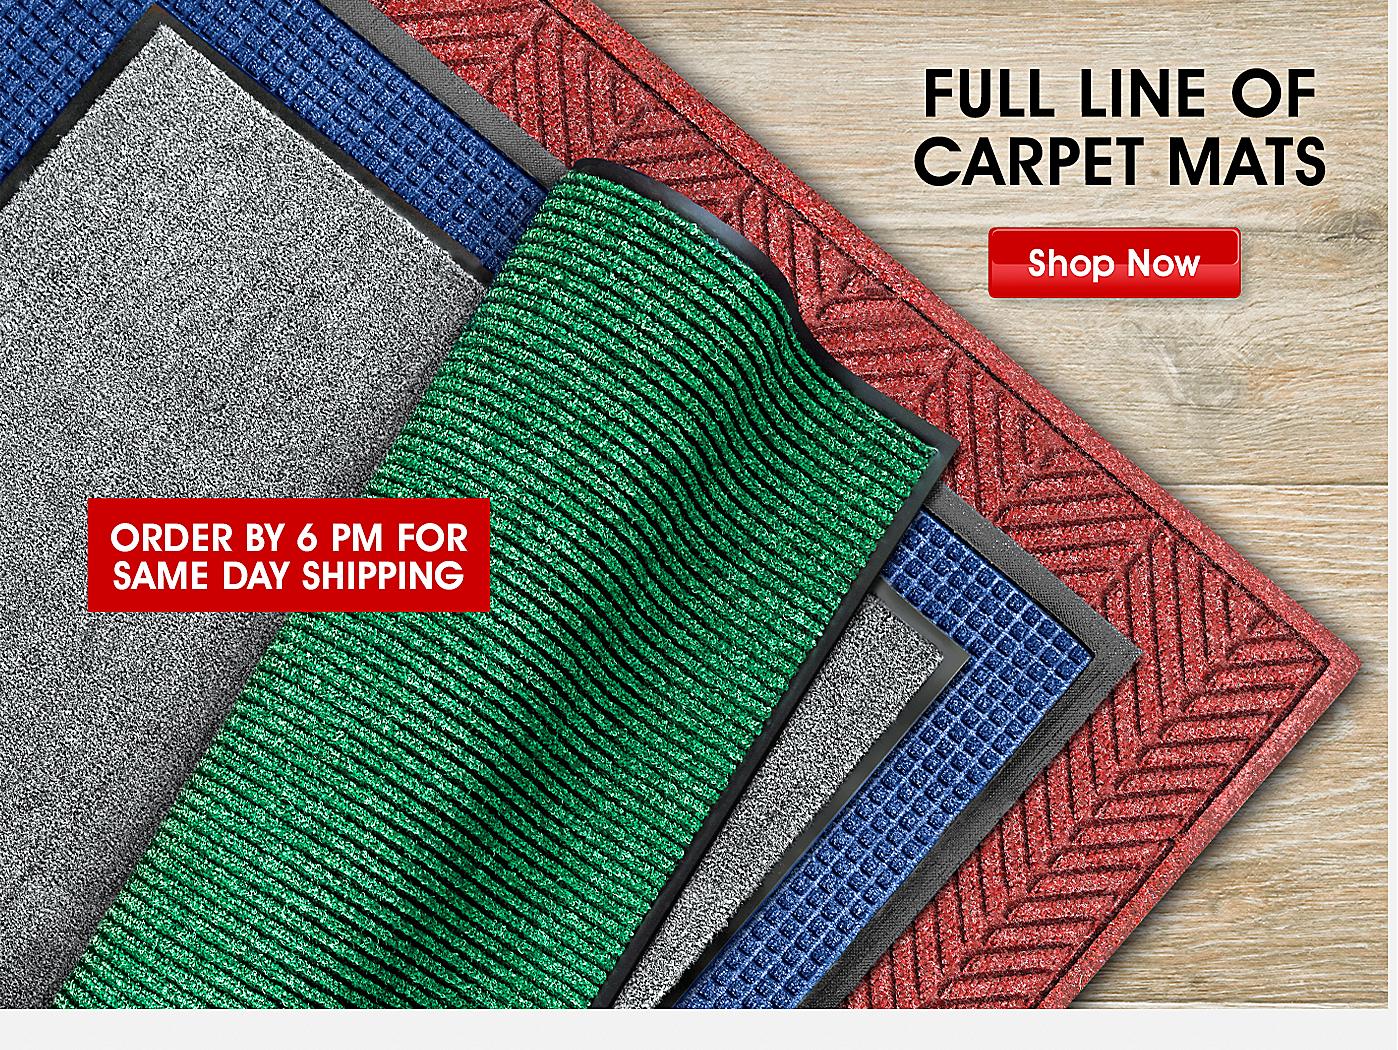 Full line of carpet mats. ORDER BY 6 PM FOR SAME DAY SHIPPING